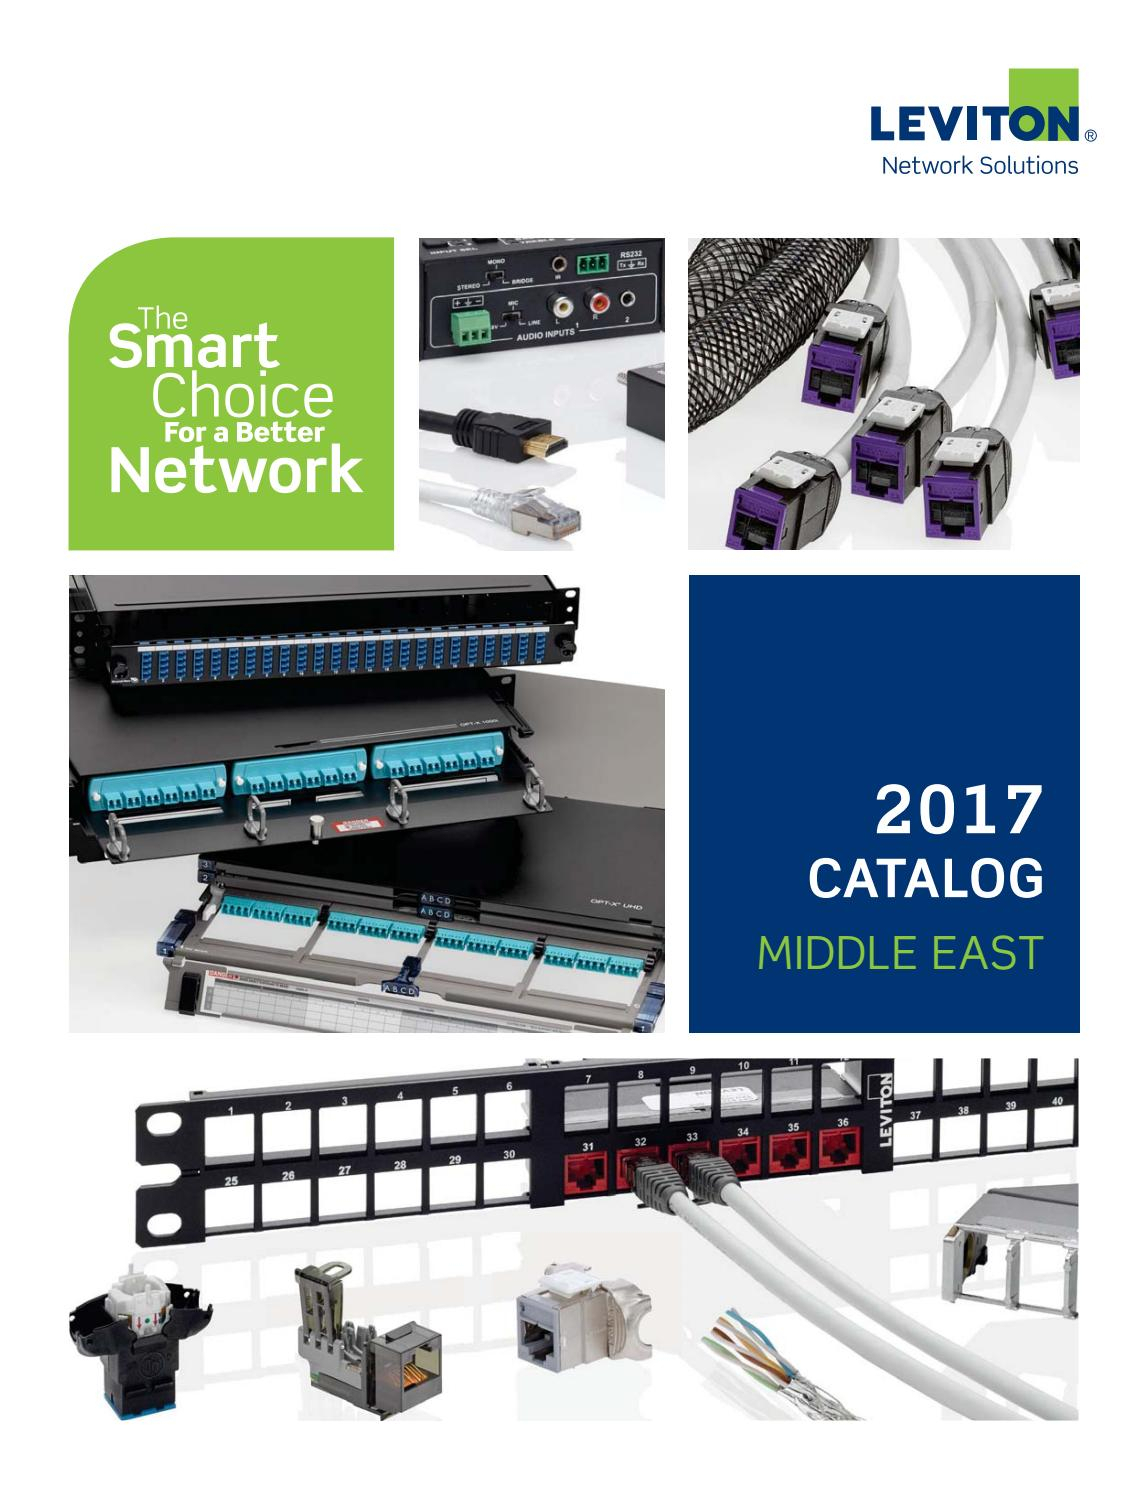 Leviton 2017 Catalogue Middle Eastsentor Electrical – Issuu Inside Leviton Patch Panel Label Template